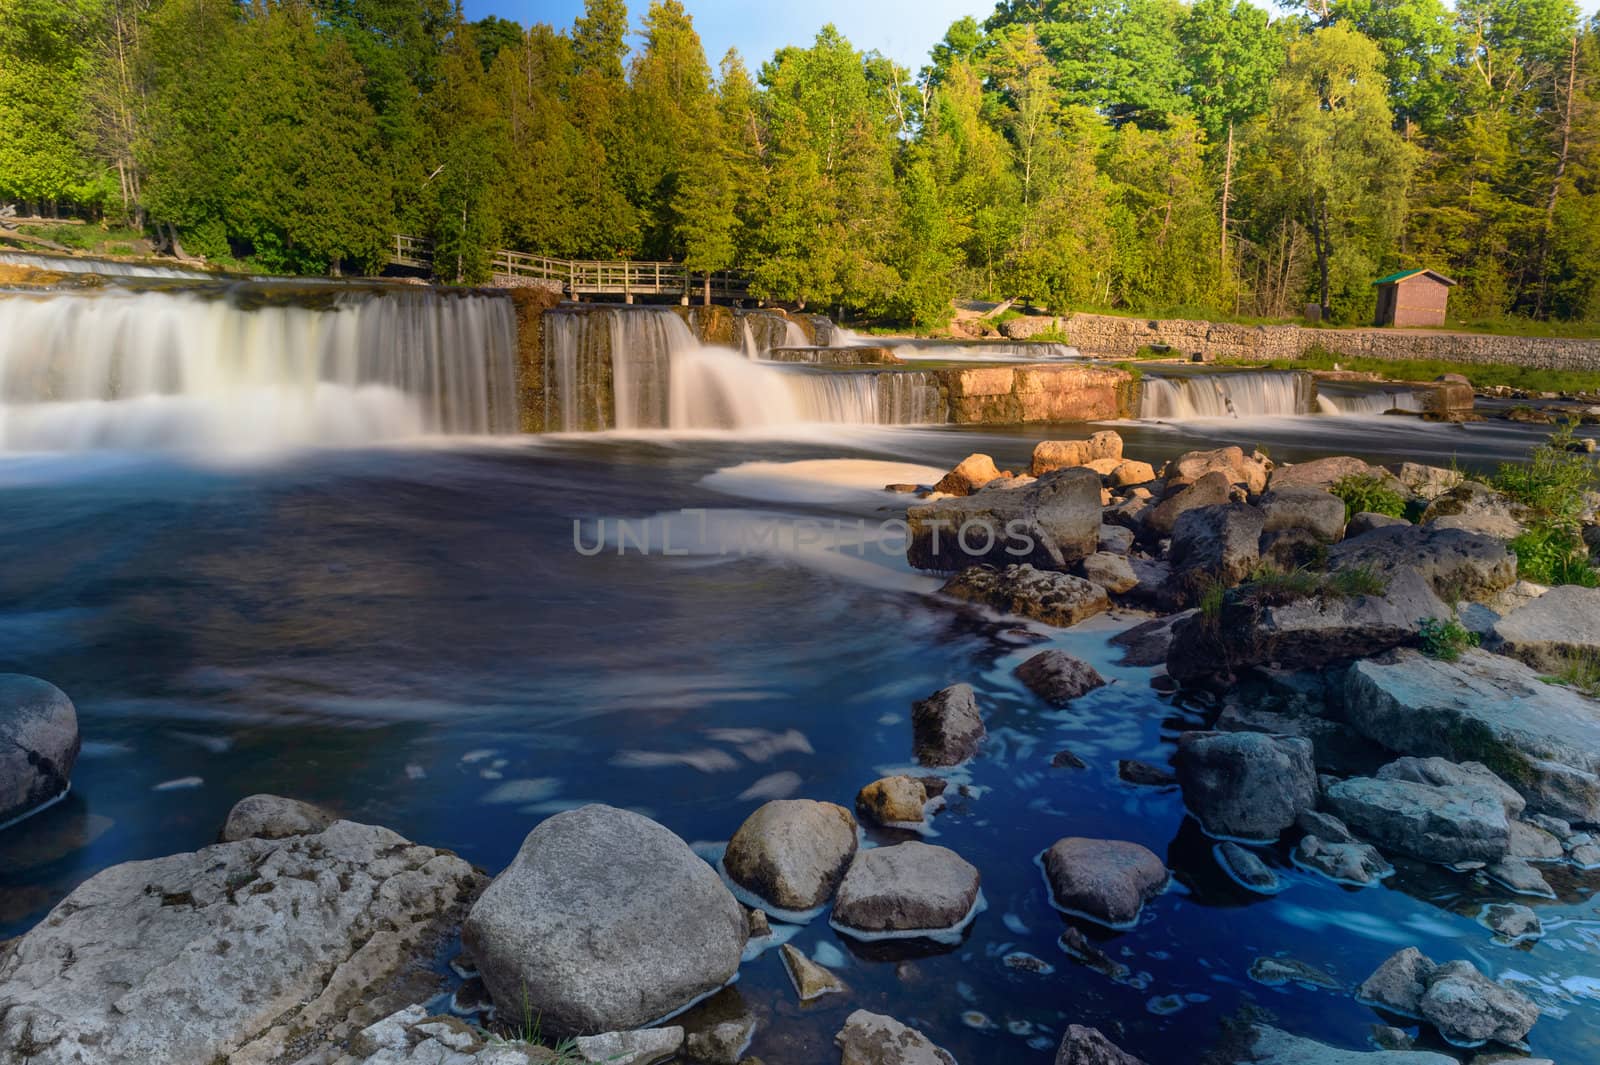 Sauble Falls Provincial Park is located in the community of Sauble Falls, town of South Bruce Peninsula, Bruce County in southwestern Ontario, Canada. It is in the lower drainage basin of the Sauble River, which flows into Lake Huron.